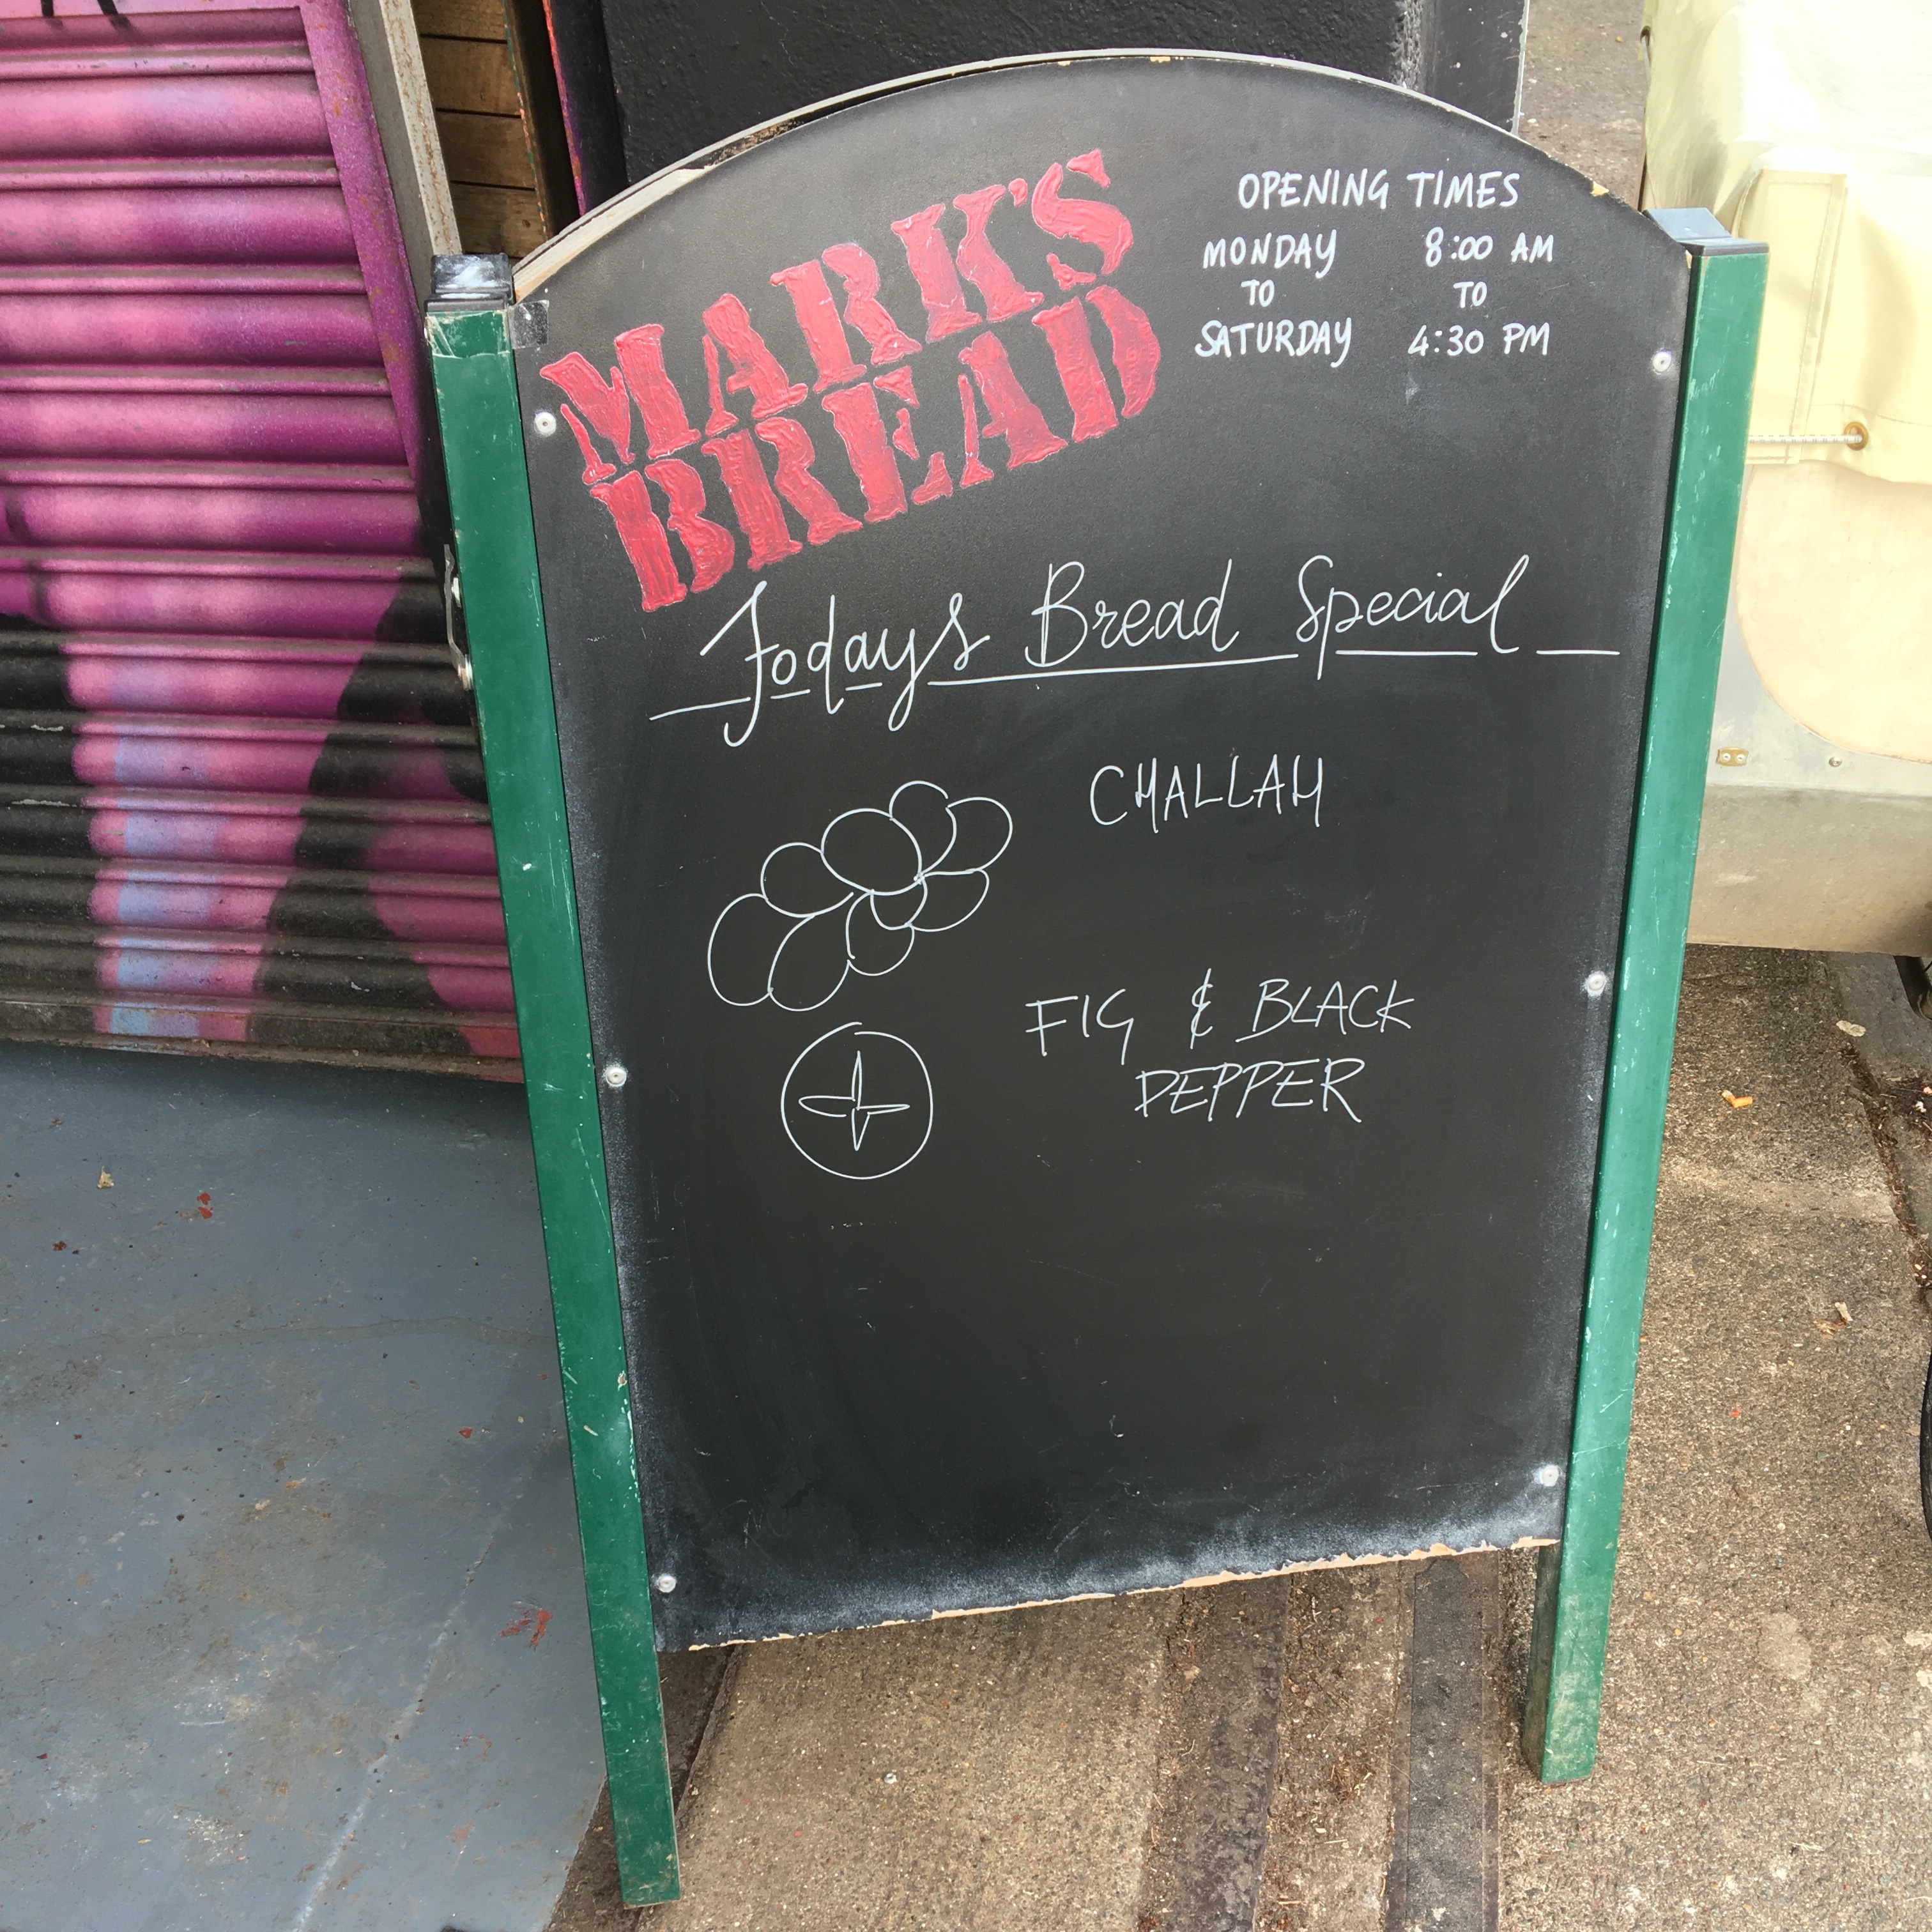 The sign outside Marks bread listing the daily specials. That day it was Challah and Fig and Black Pepper sourdough